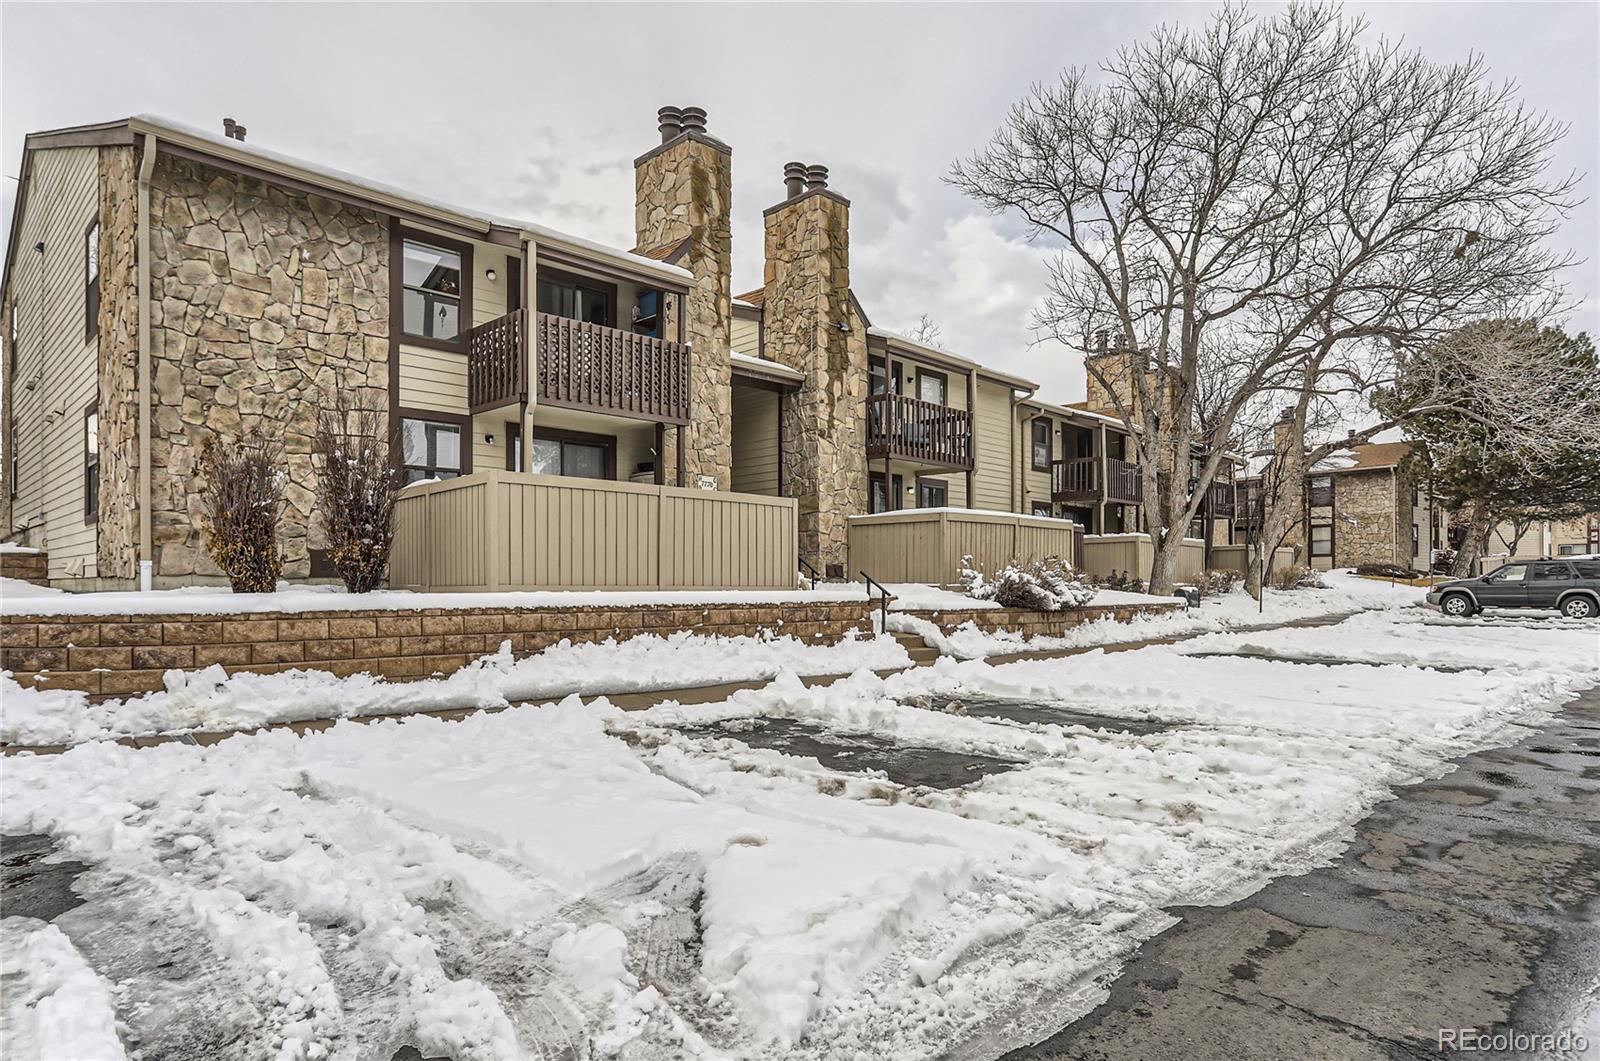 7770 W 87th Drive C, Arvada  MLS: 5614600 Beds: 1 Baths: 1 Price: $275,000